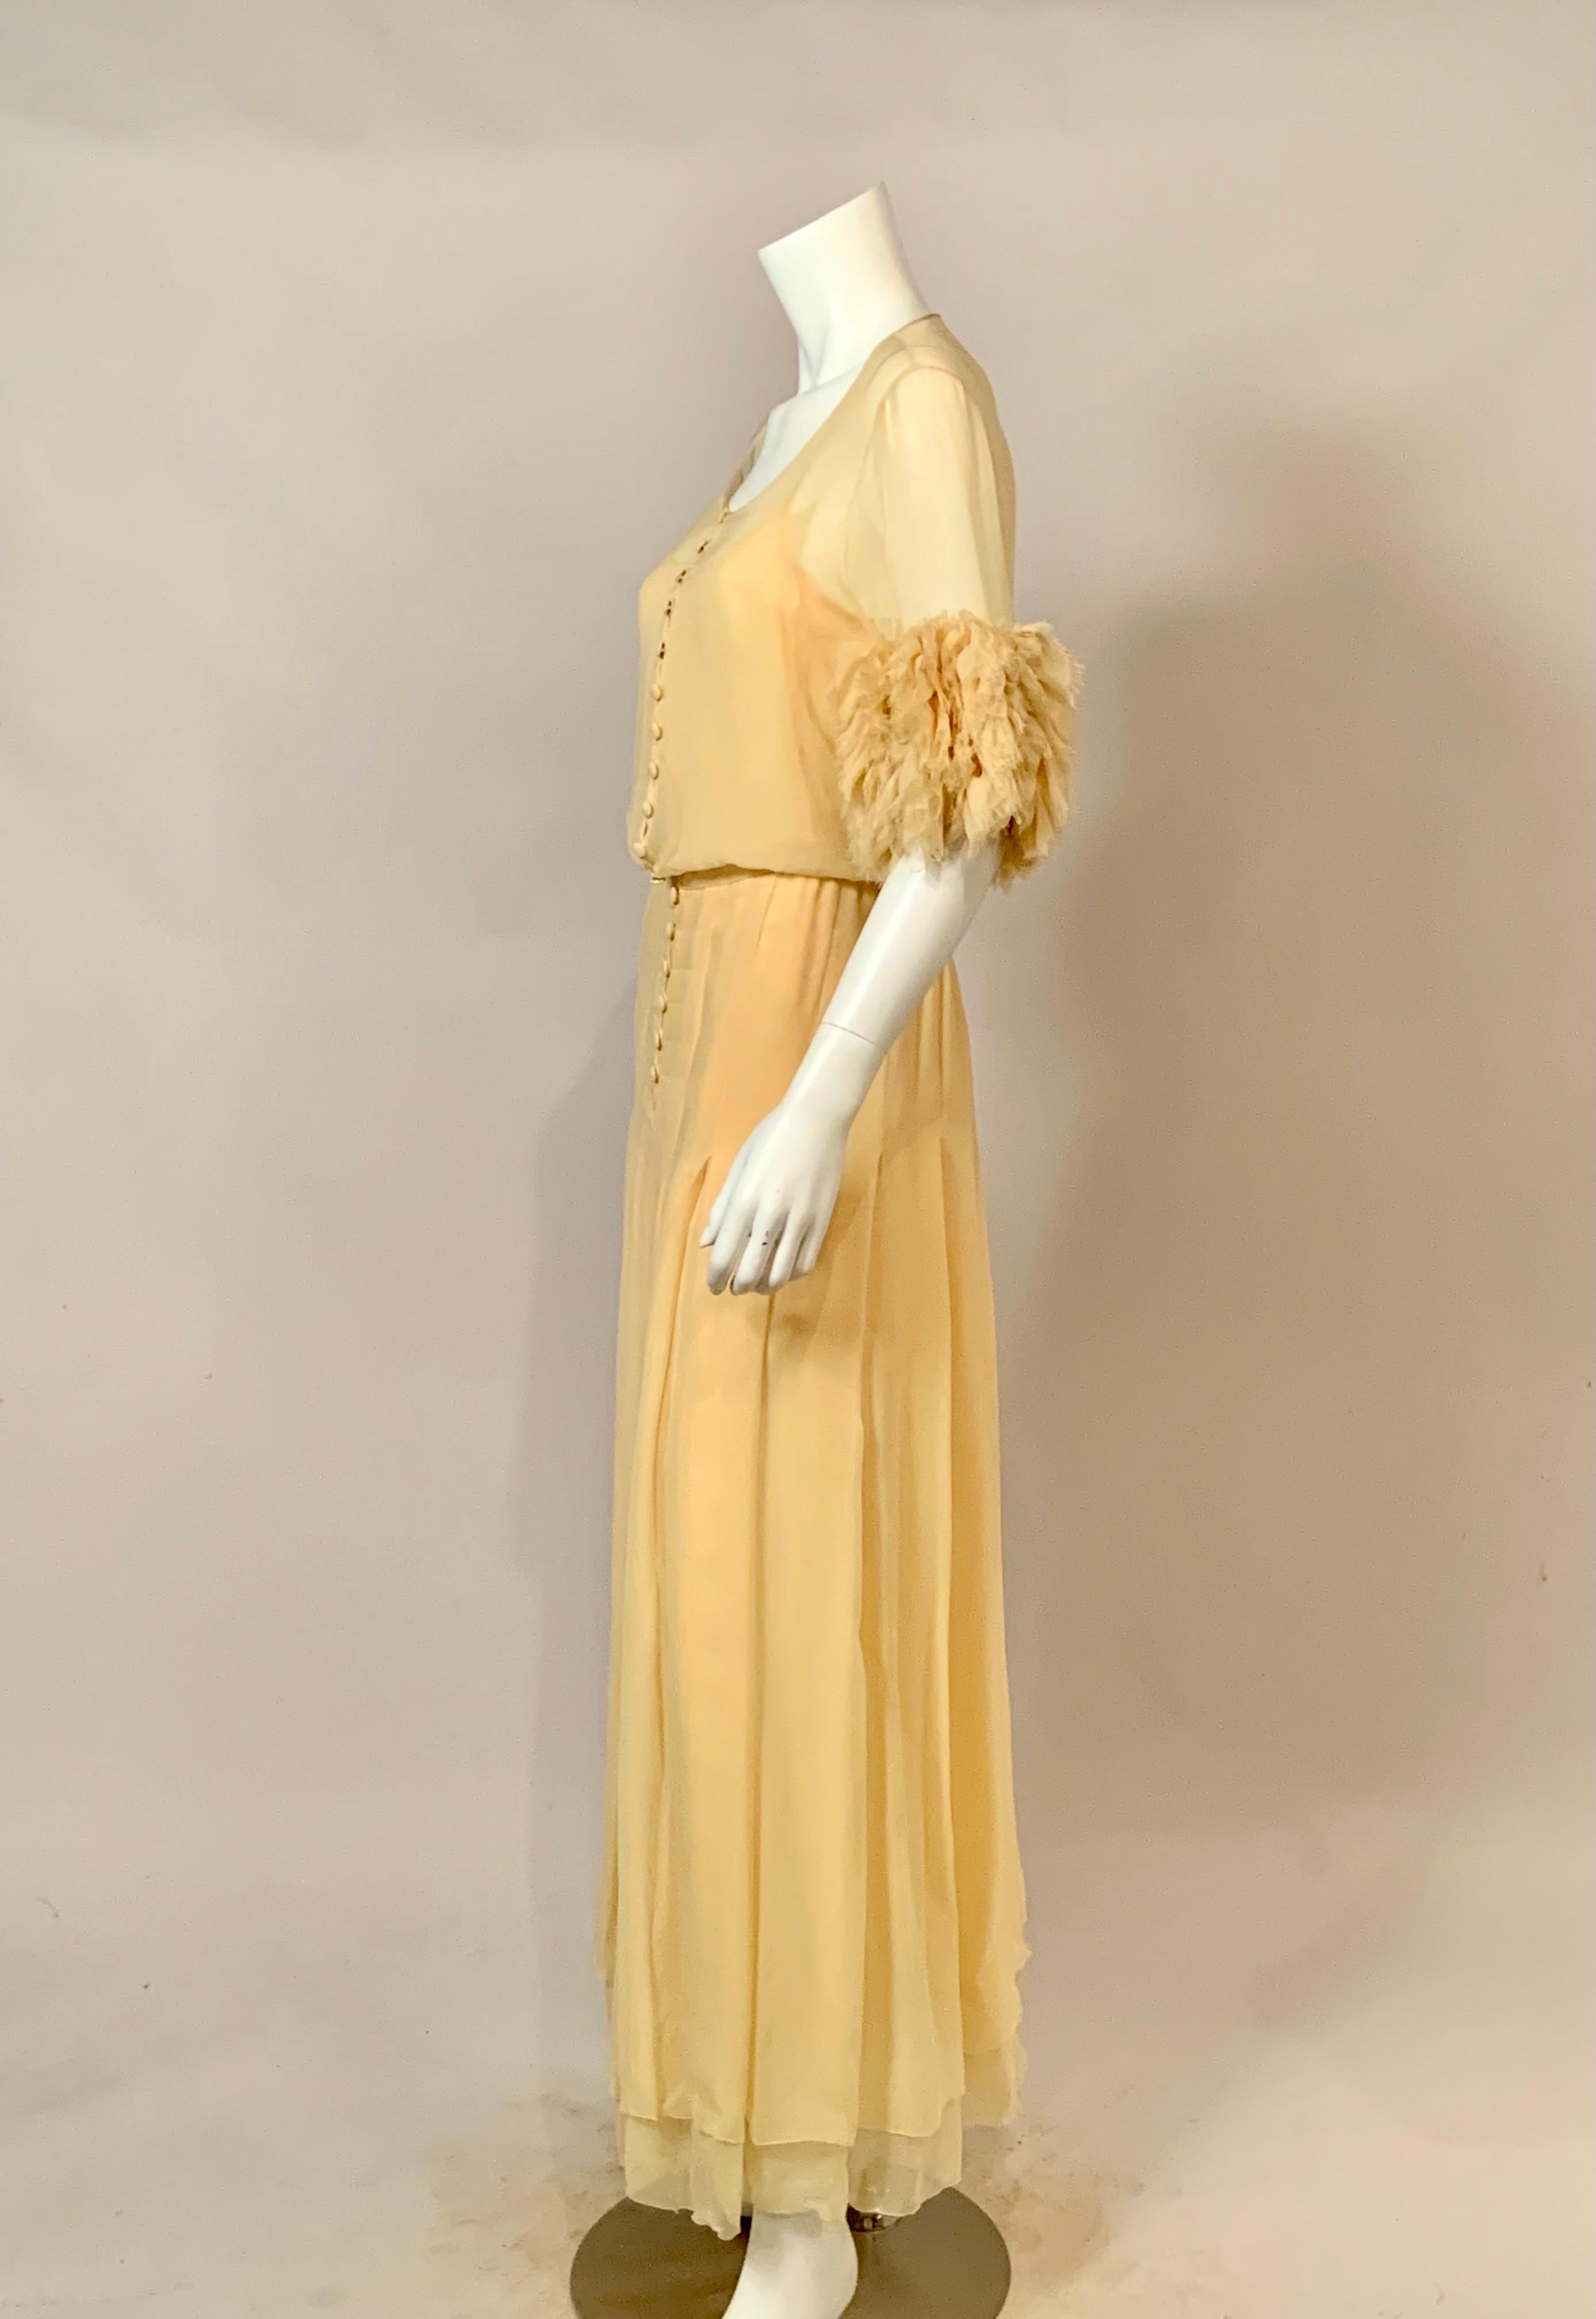 1984 Chanel by Karl Lagerfeld Butter Yellow Silk Chiffon Evening Gown Never Worn 9